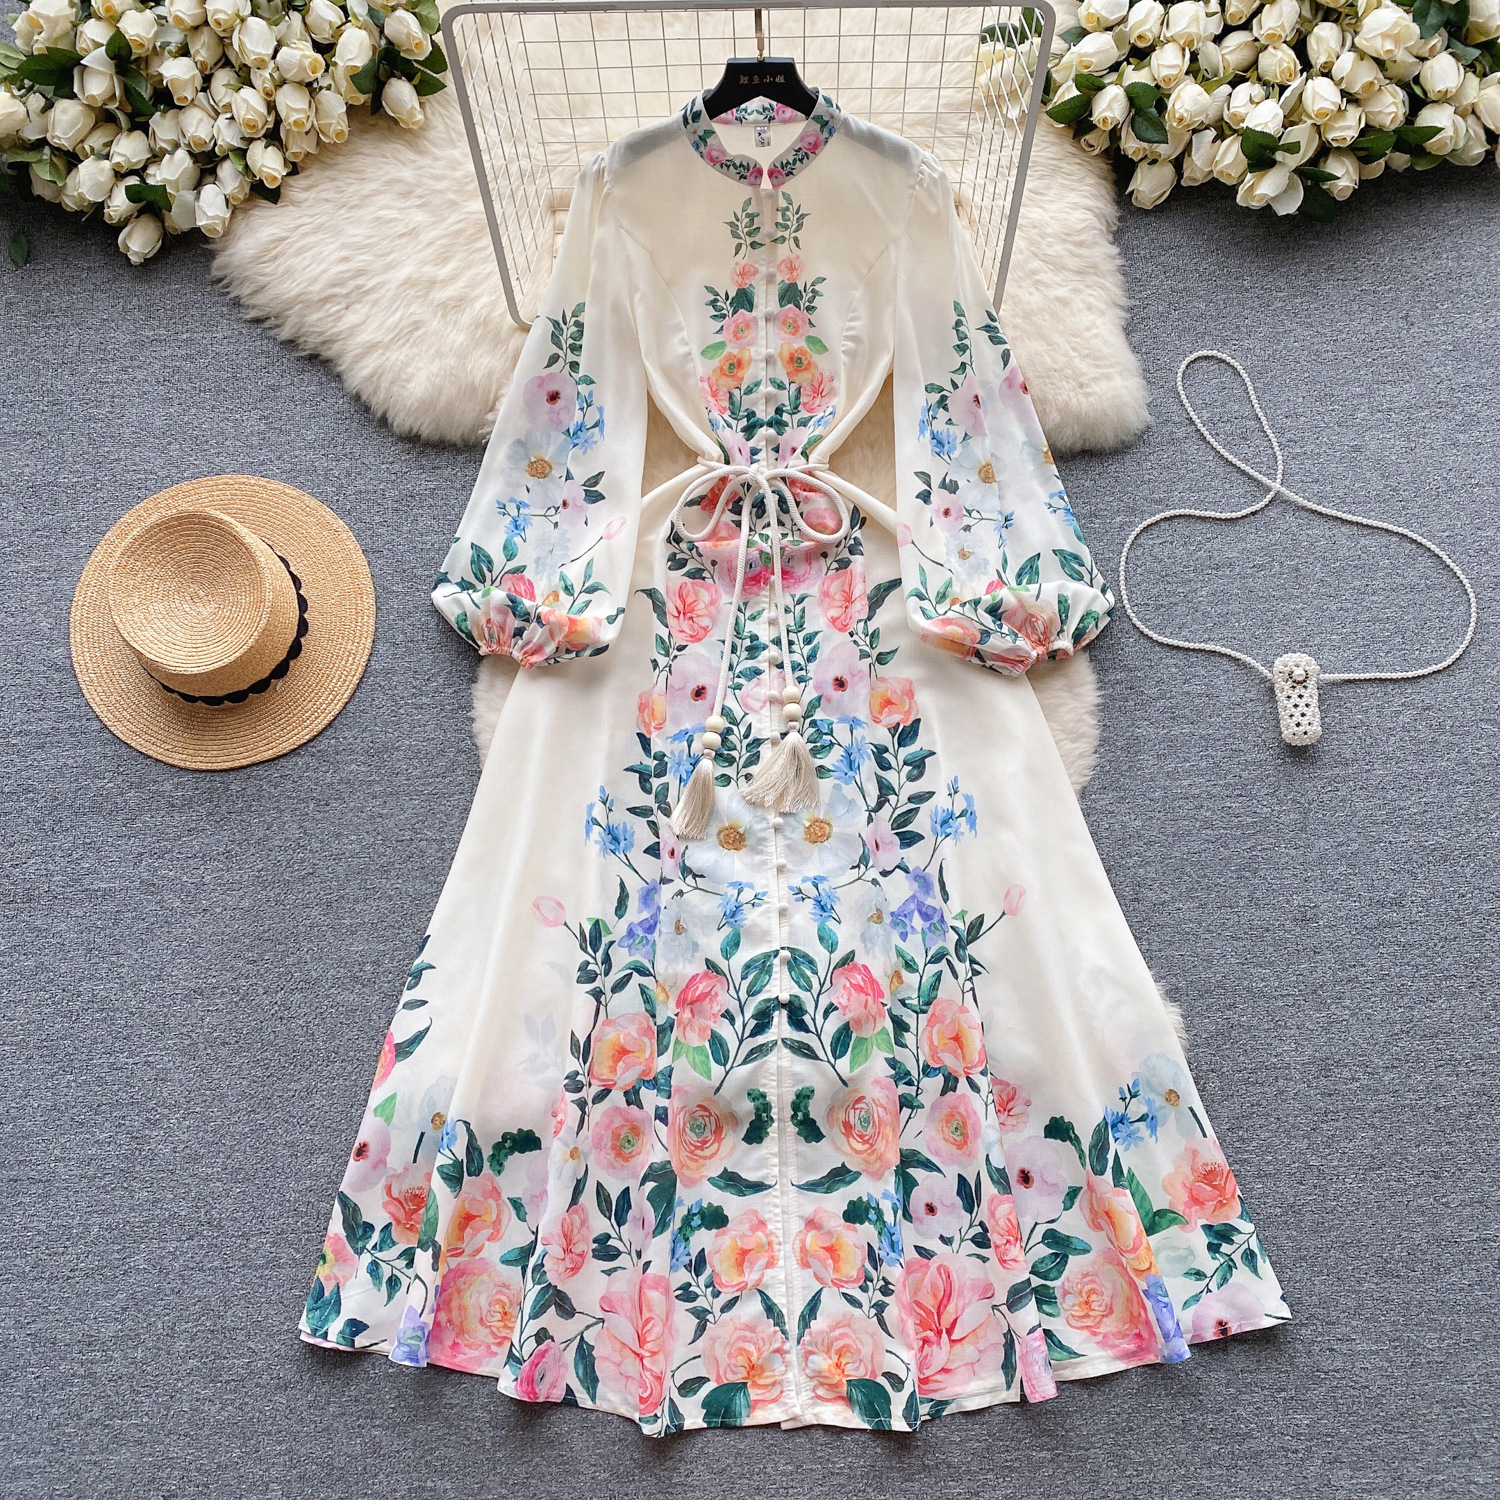 Palace style dress for women in spring, new elegant print, buckle up waist, slimming temperament, long skirt, French holiday dress